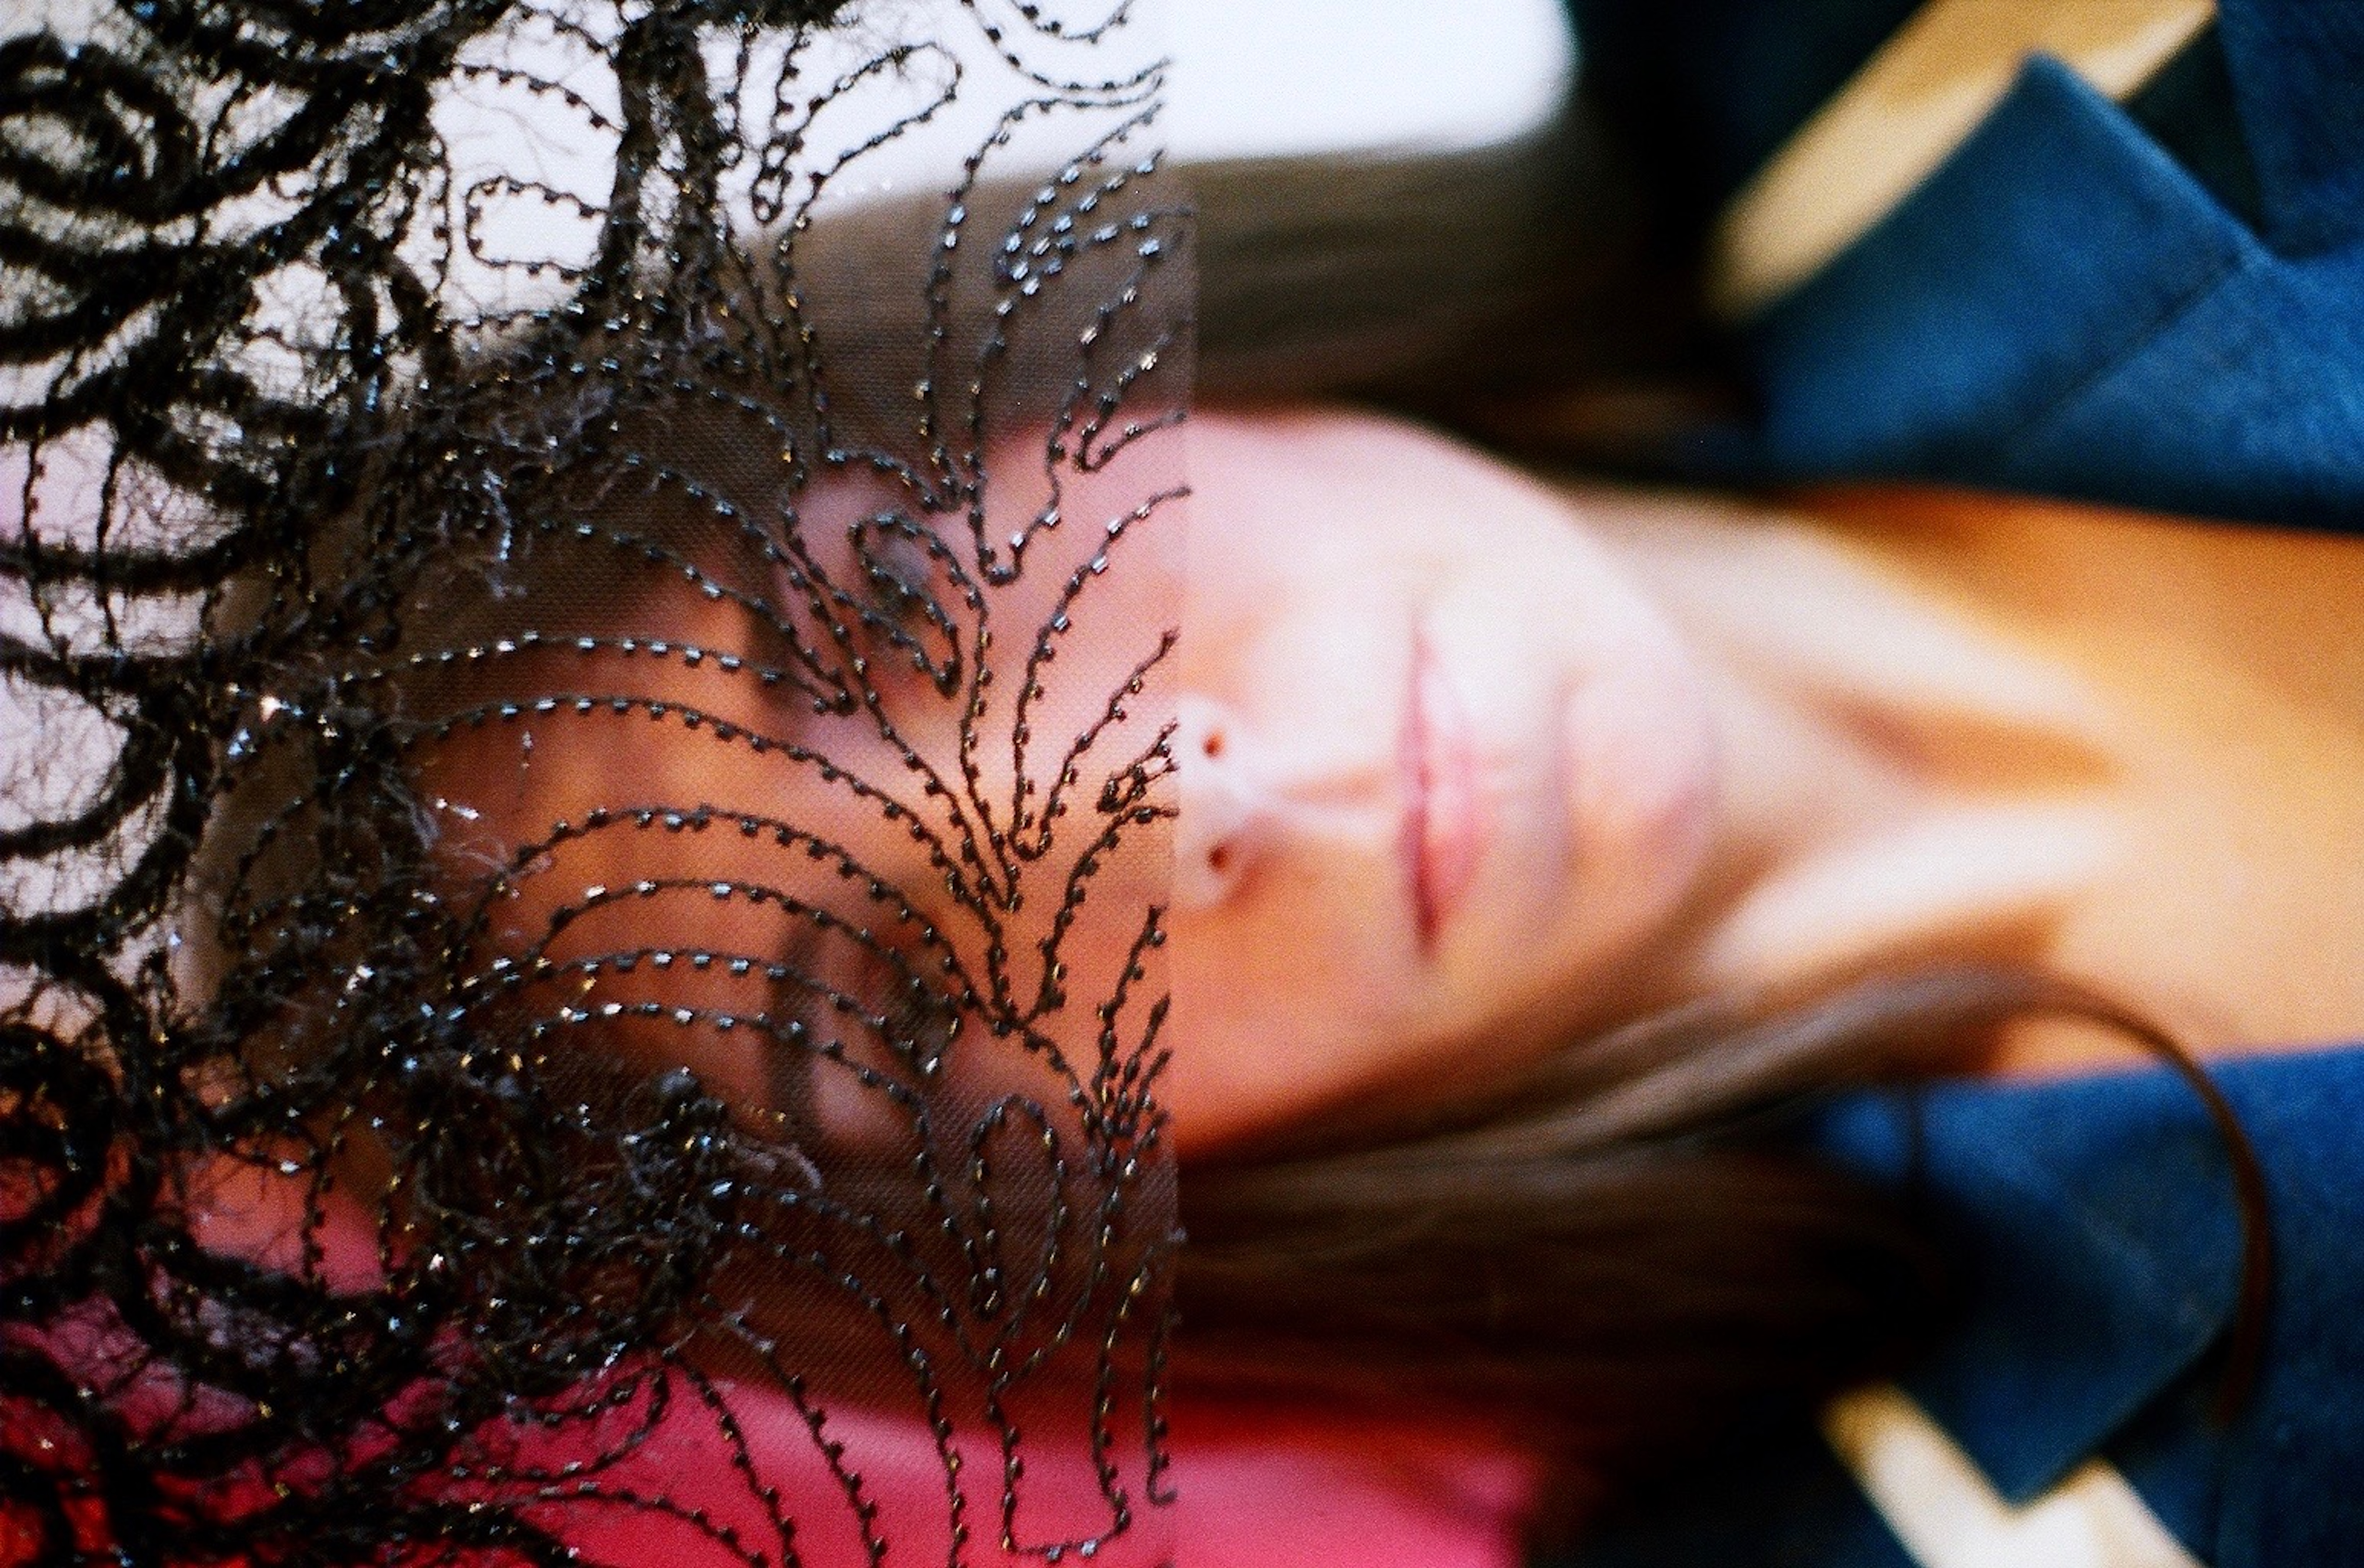 Portrait of a woman with long dark hair, sideways, holding up a piece of black lace that covers the top half of her face.